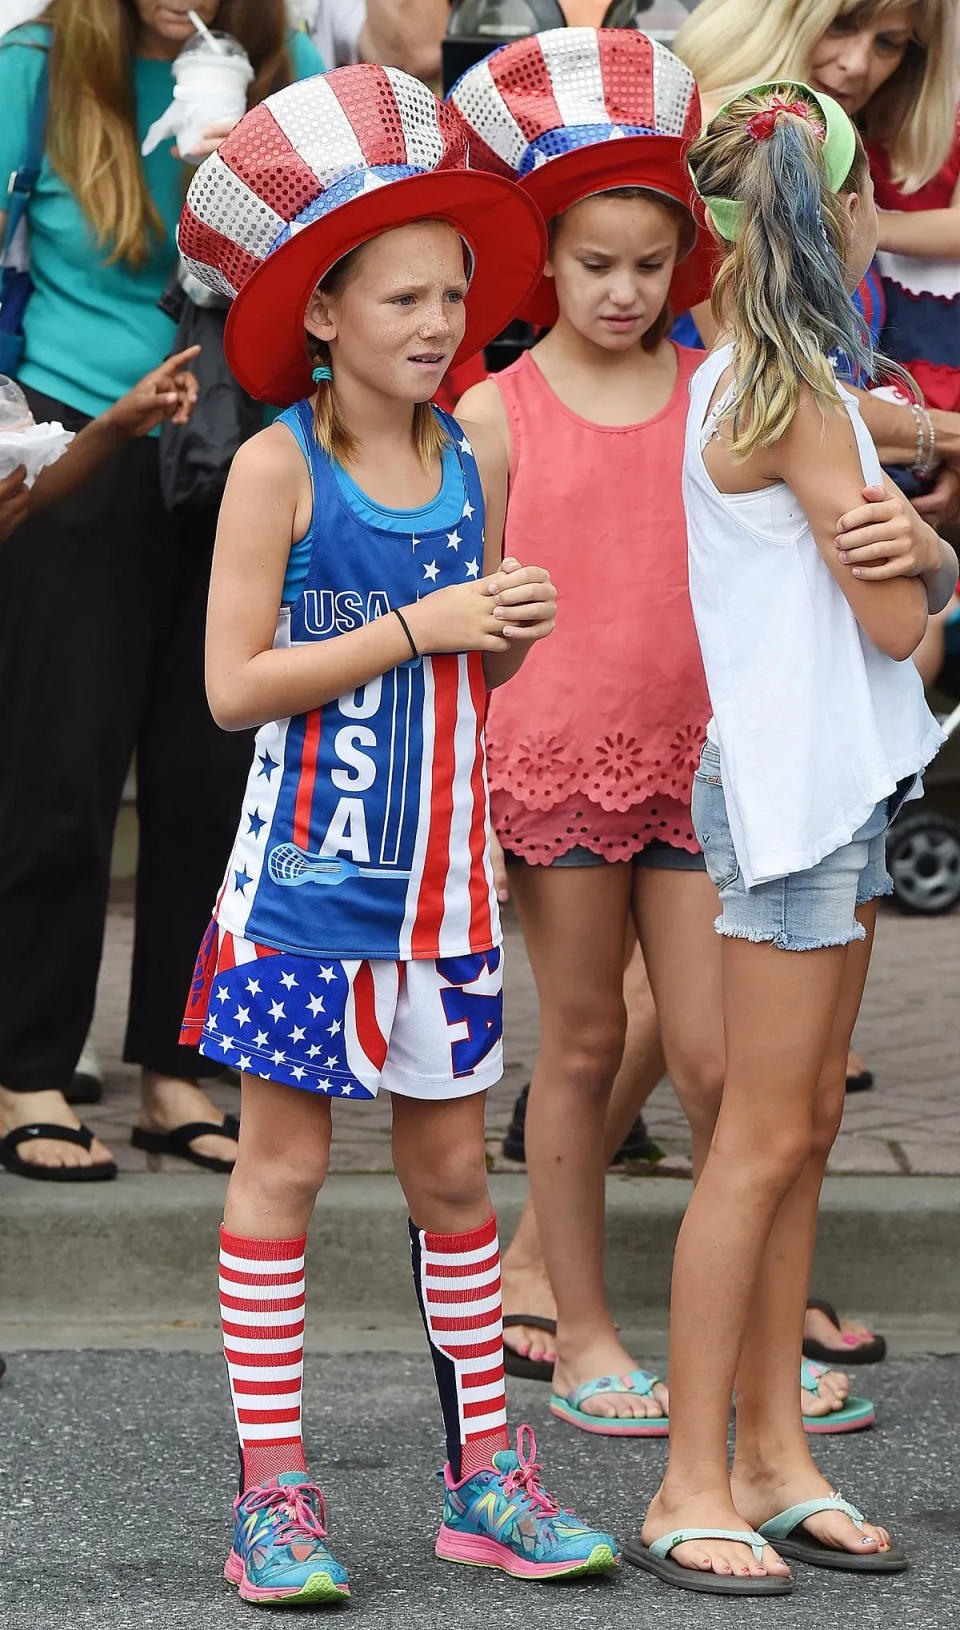 Lewes' Independence Day celebration will paint the town red, white and blue on Tuesday, July 4.